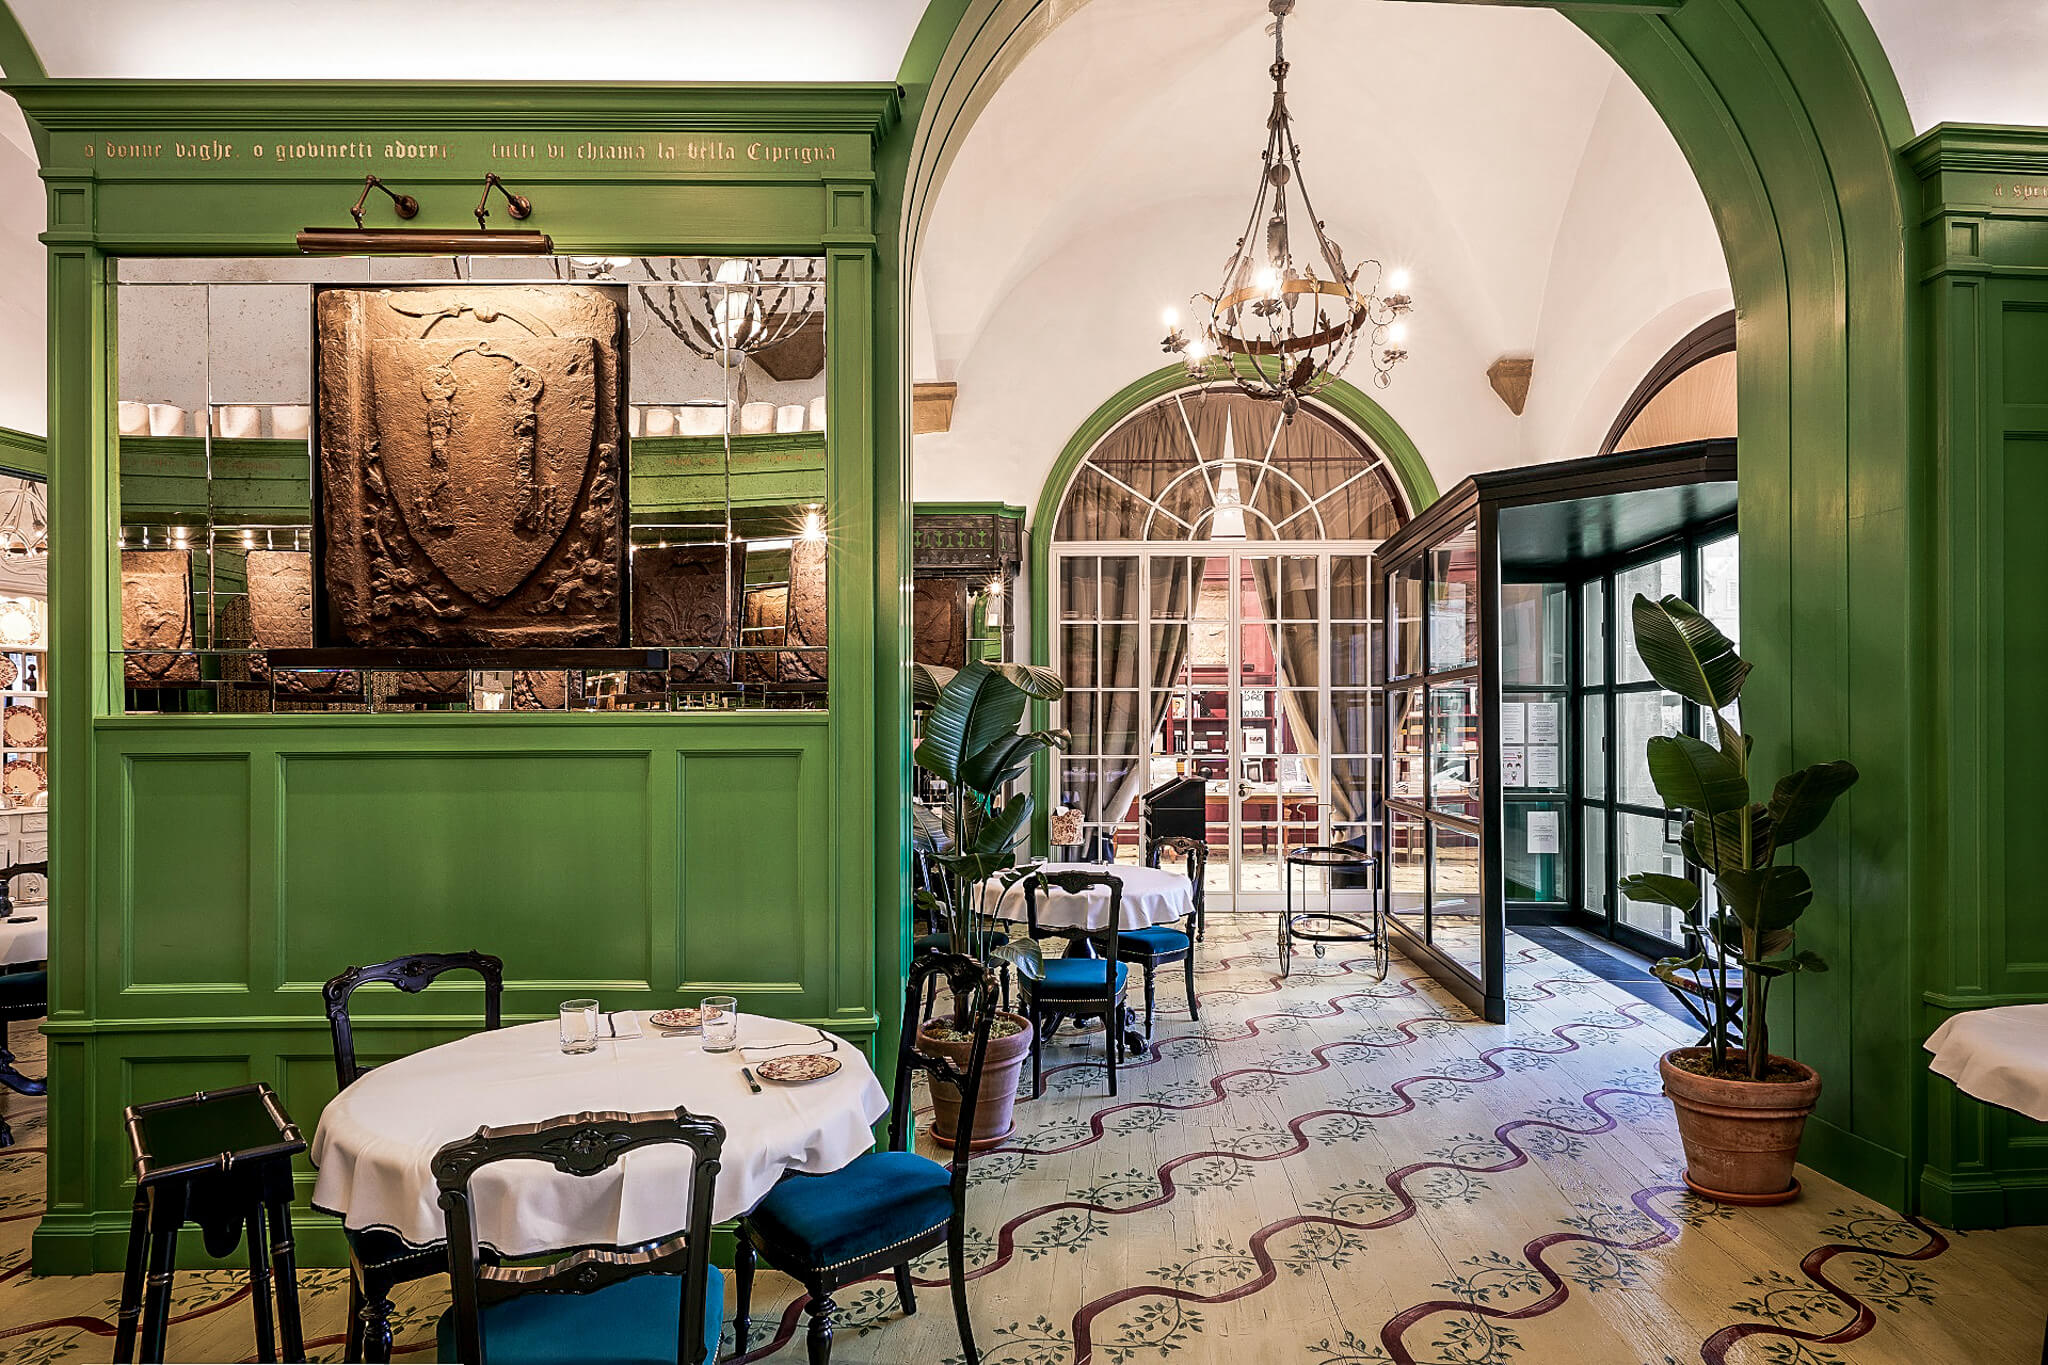 A gorgeous restaurant, the Gucci Osteria in Florence